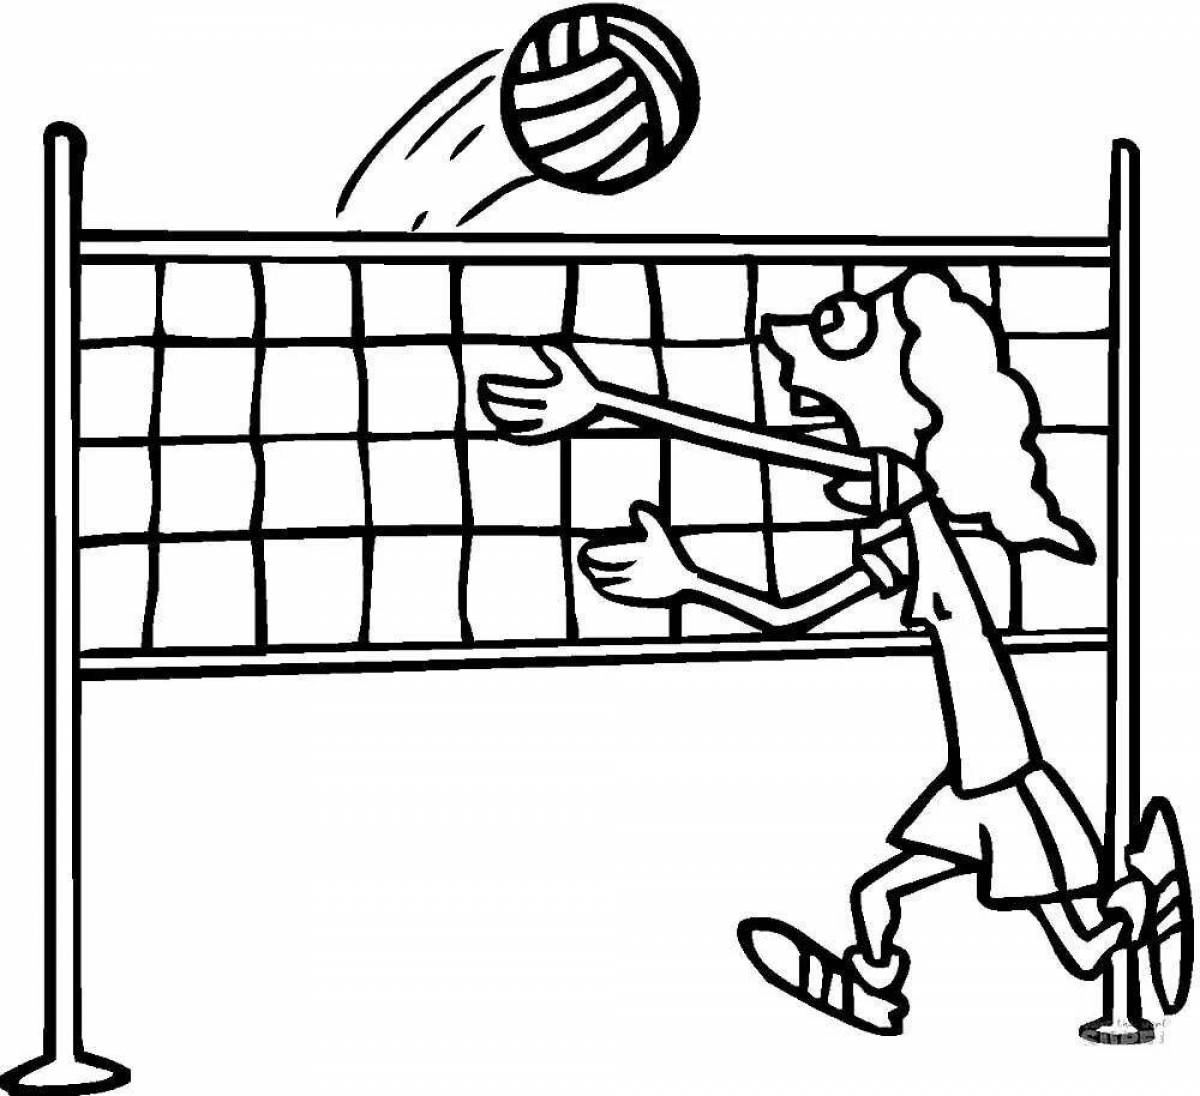 Fun volleyball coloring book for kids